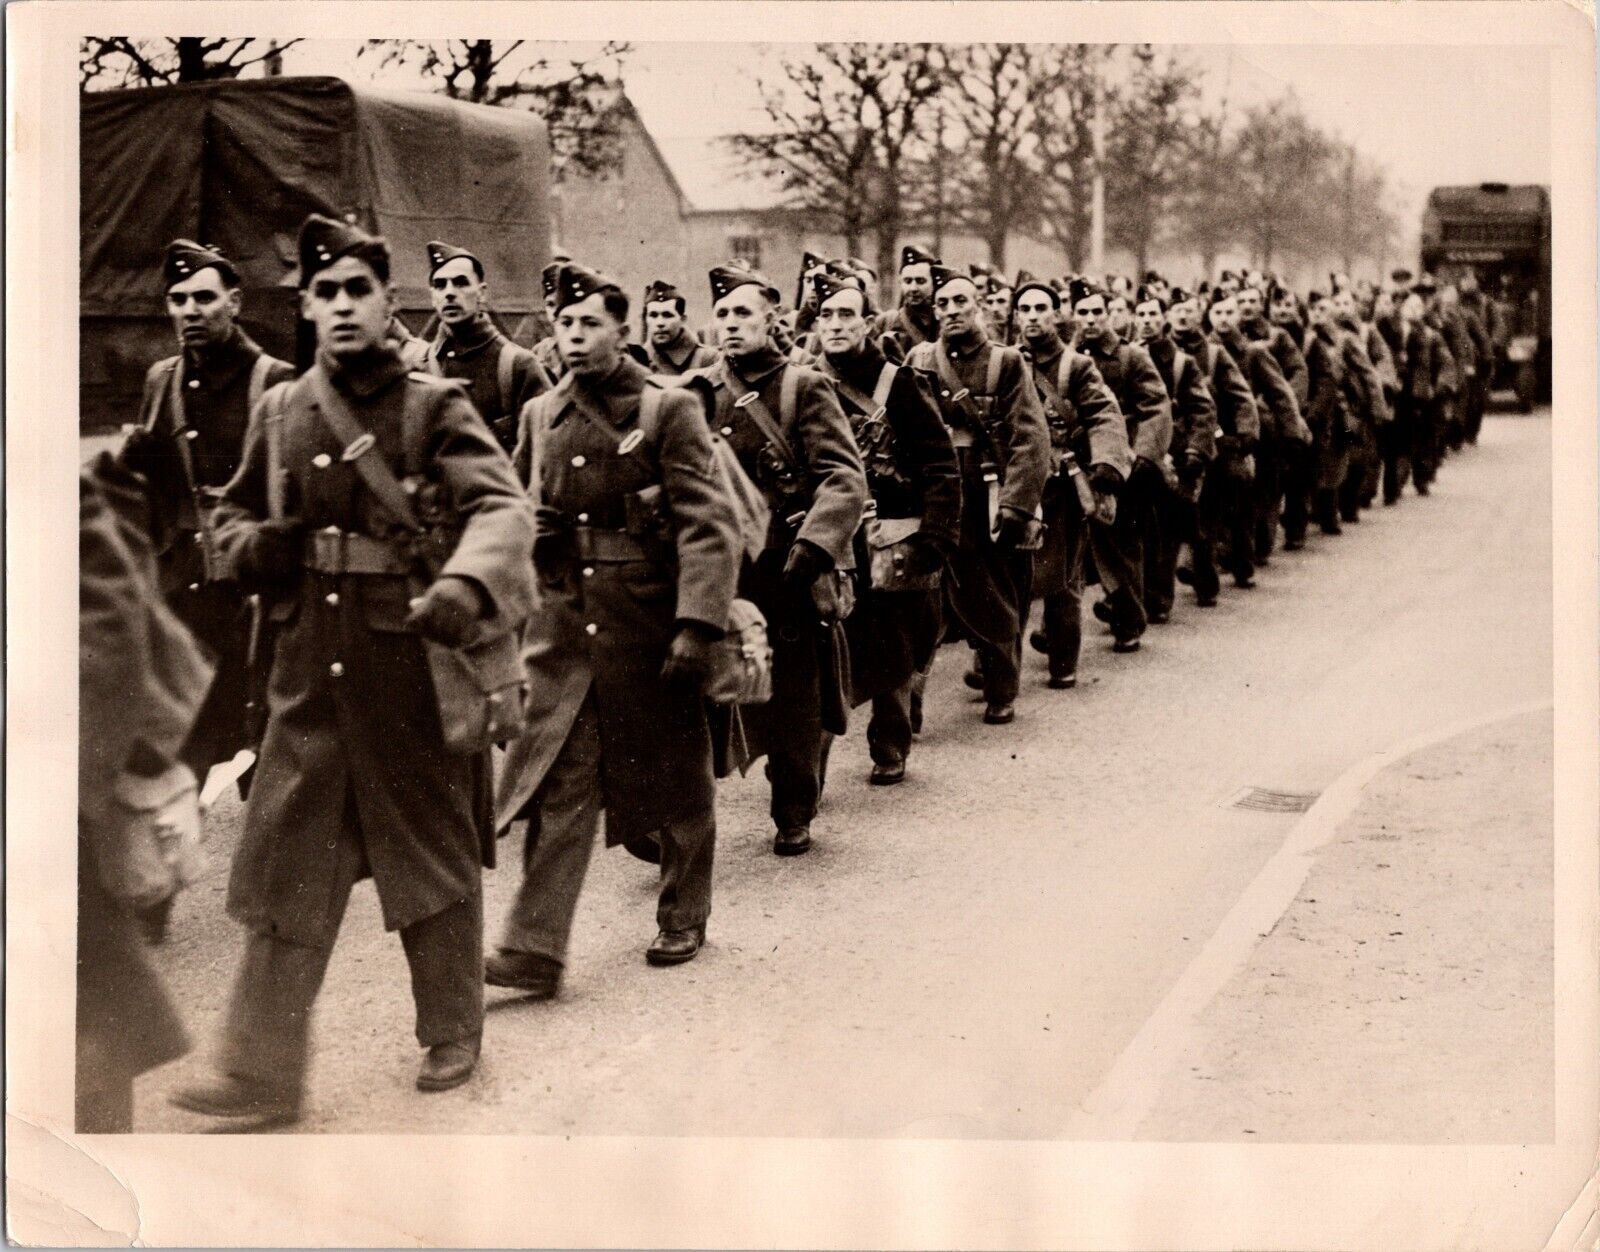 Original Type 1 WW2 Press Media Photo CANADIAN SOLDIERS MARCH IN ENGLAND 1940